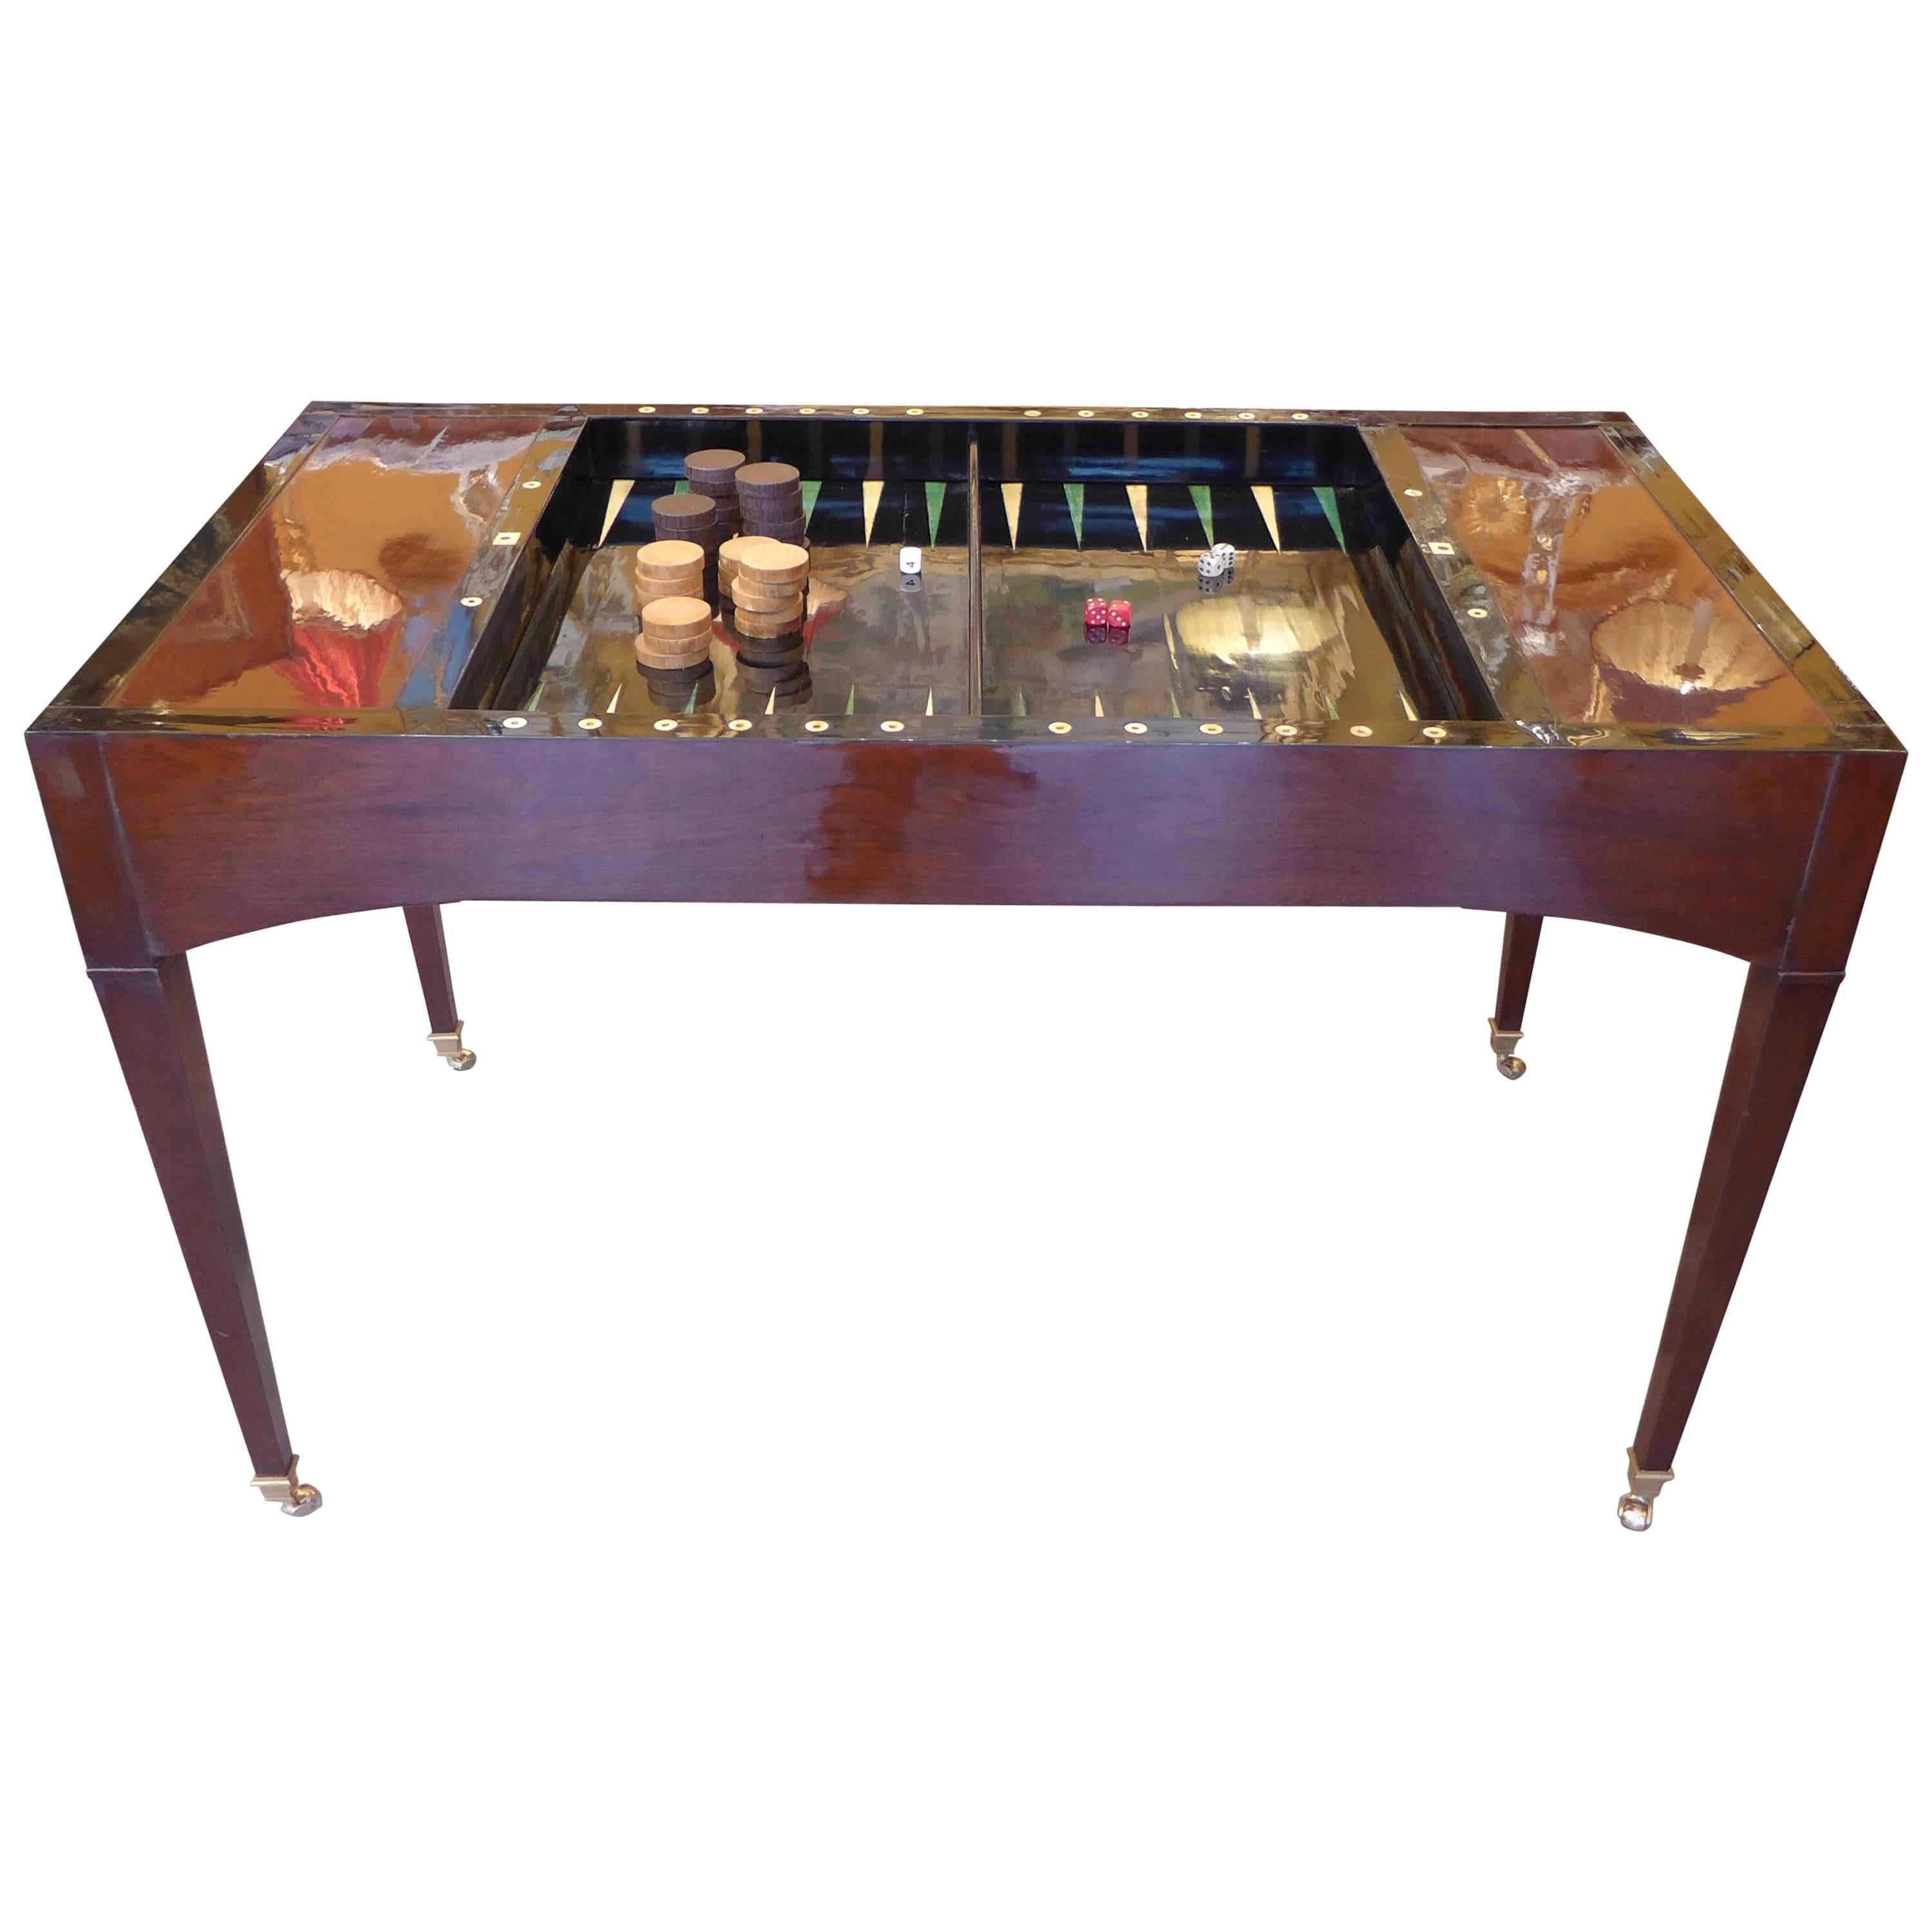 French Directoire Period, circa 1795 Reversible Desk and Tric-Trac Game Table